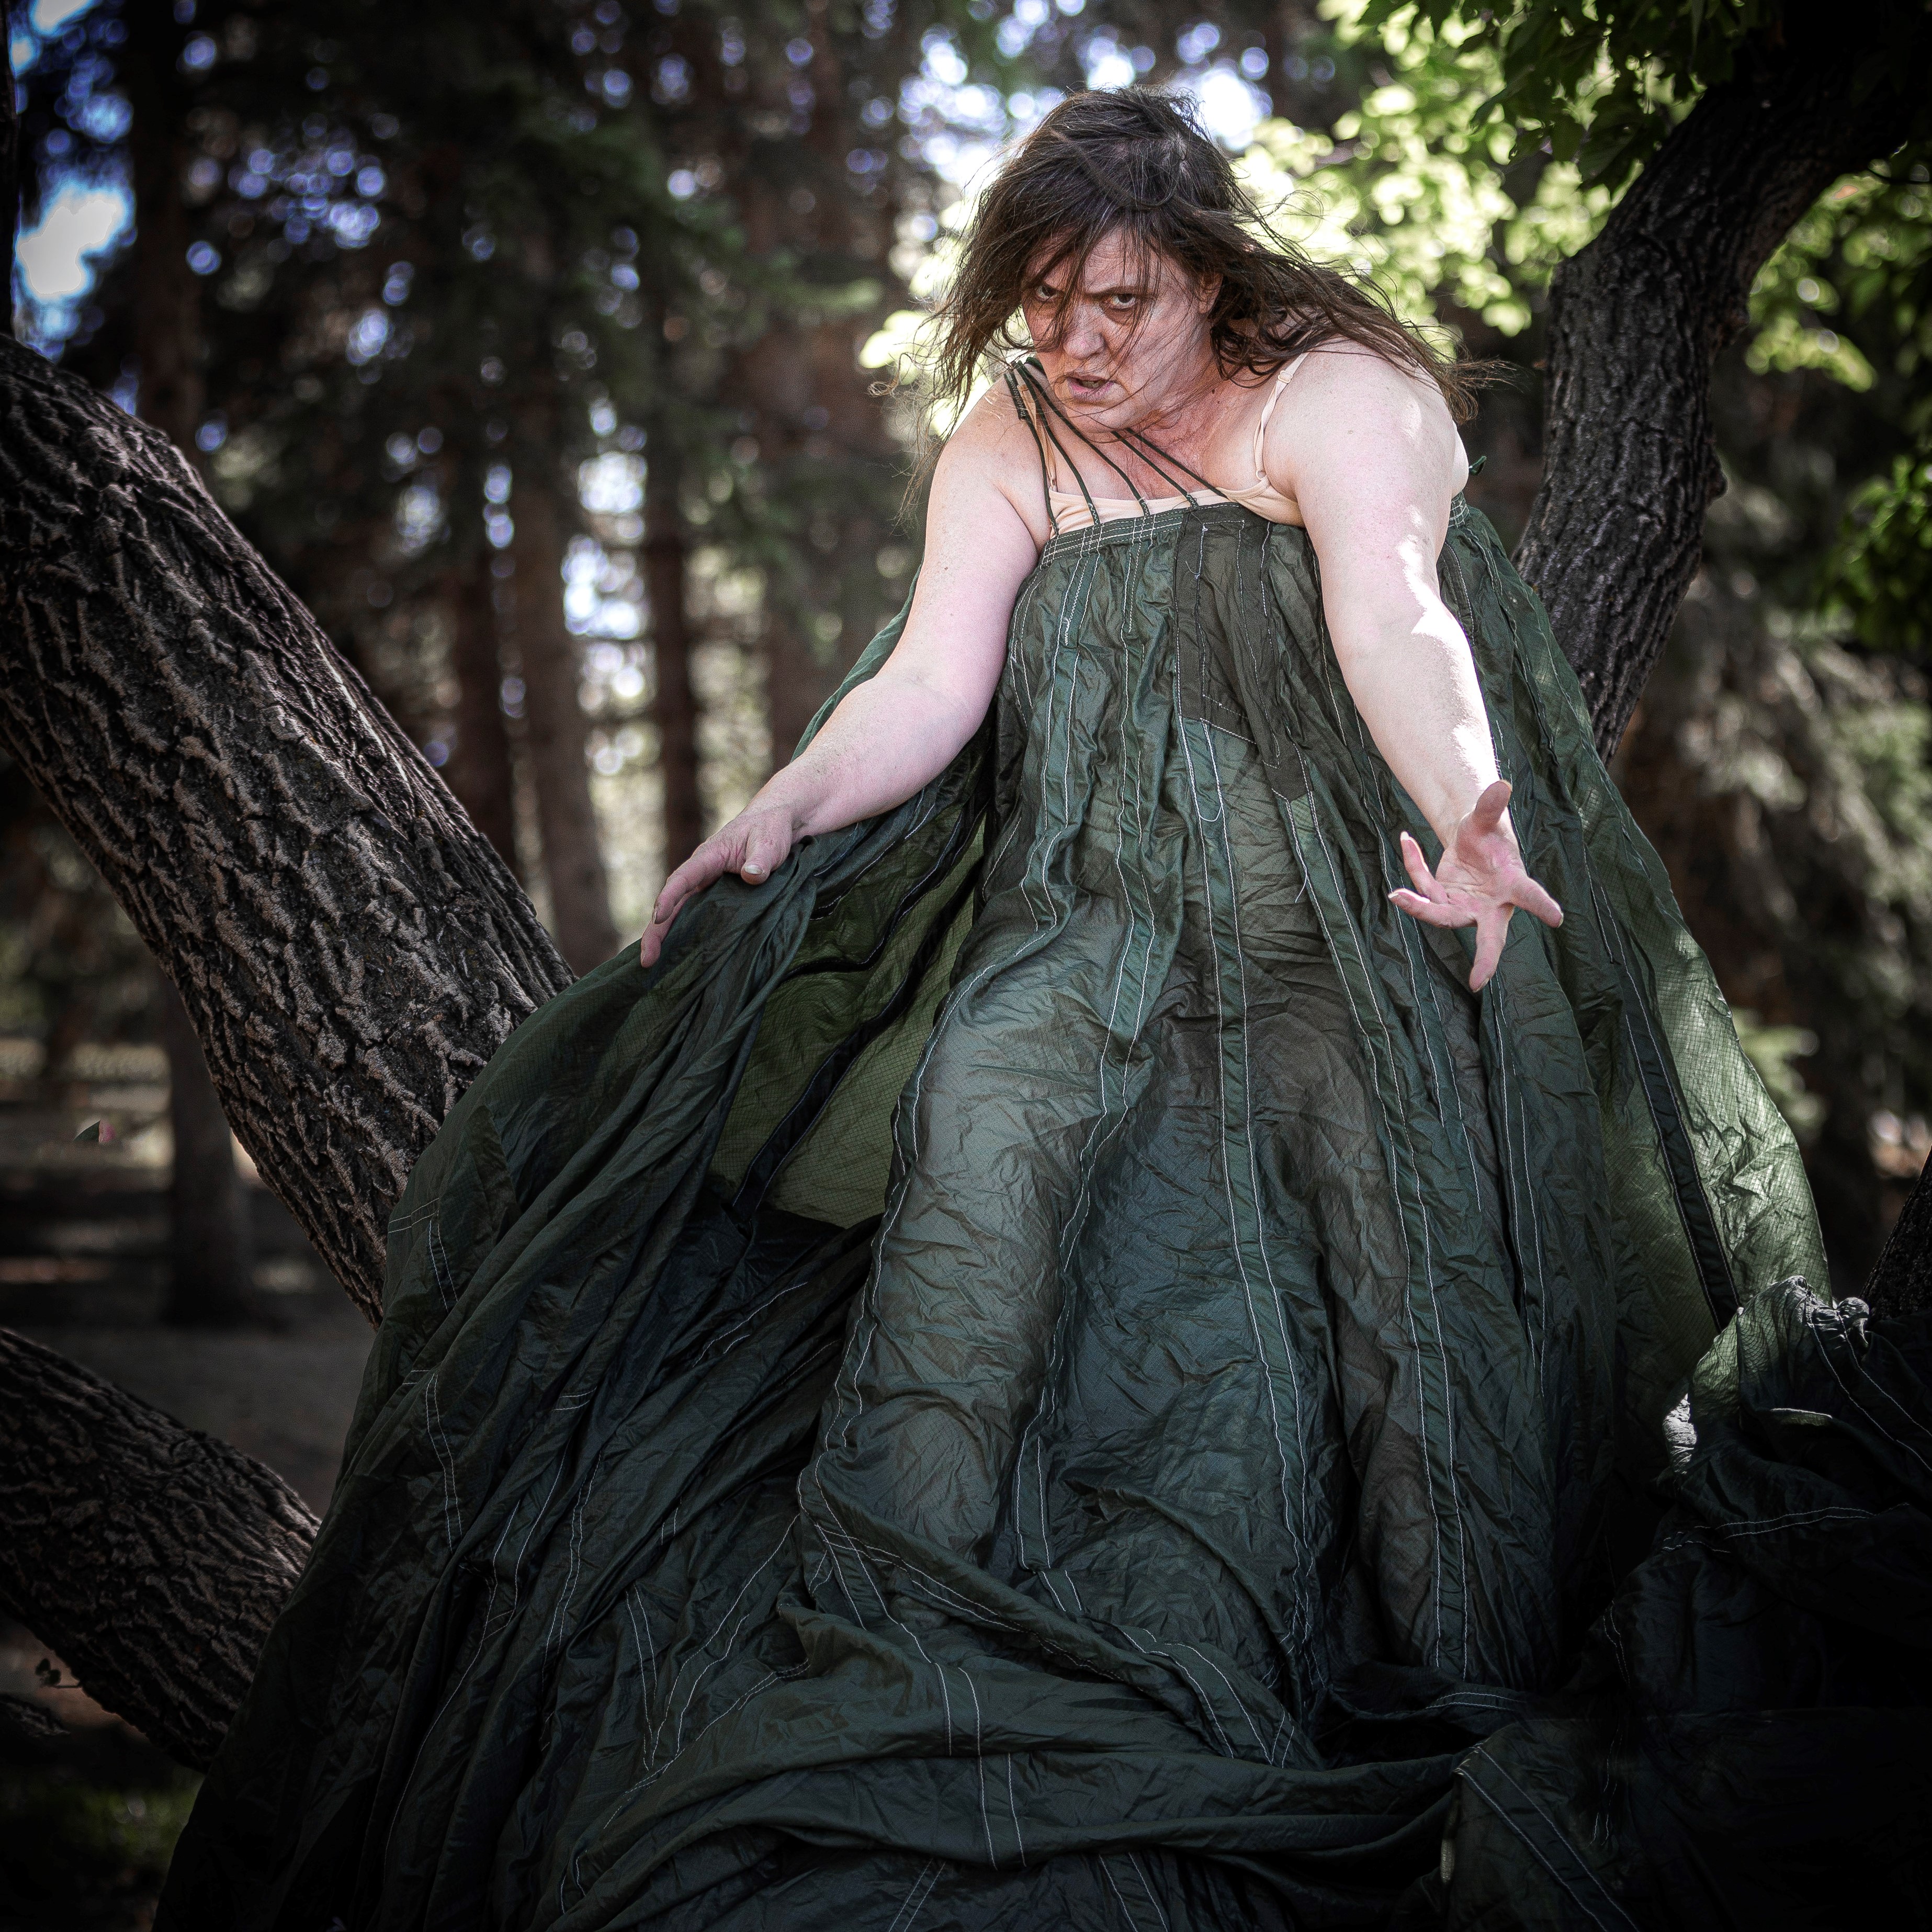 Jackie Latendresse - Photo of dance artists wrapped in a long green dress dancing.